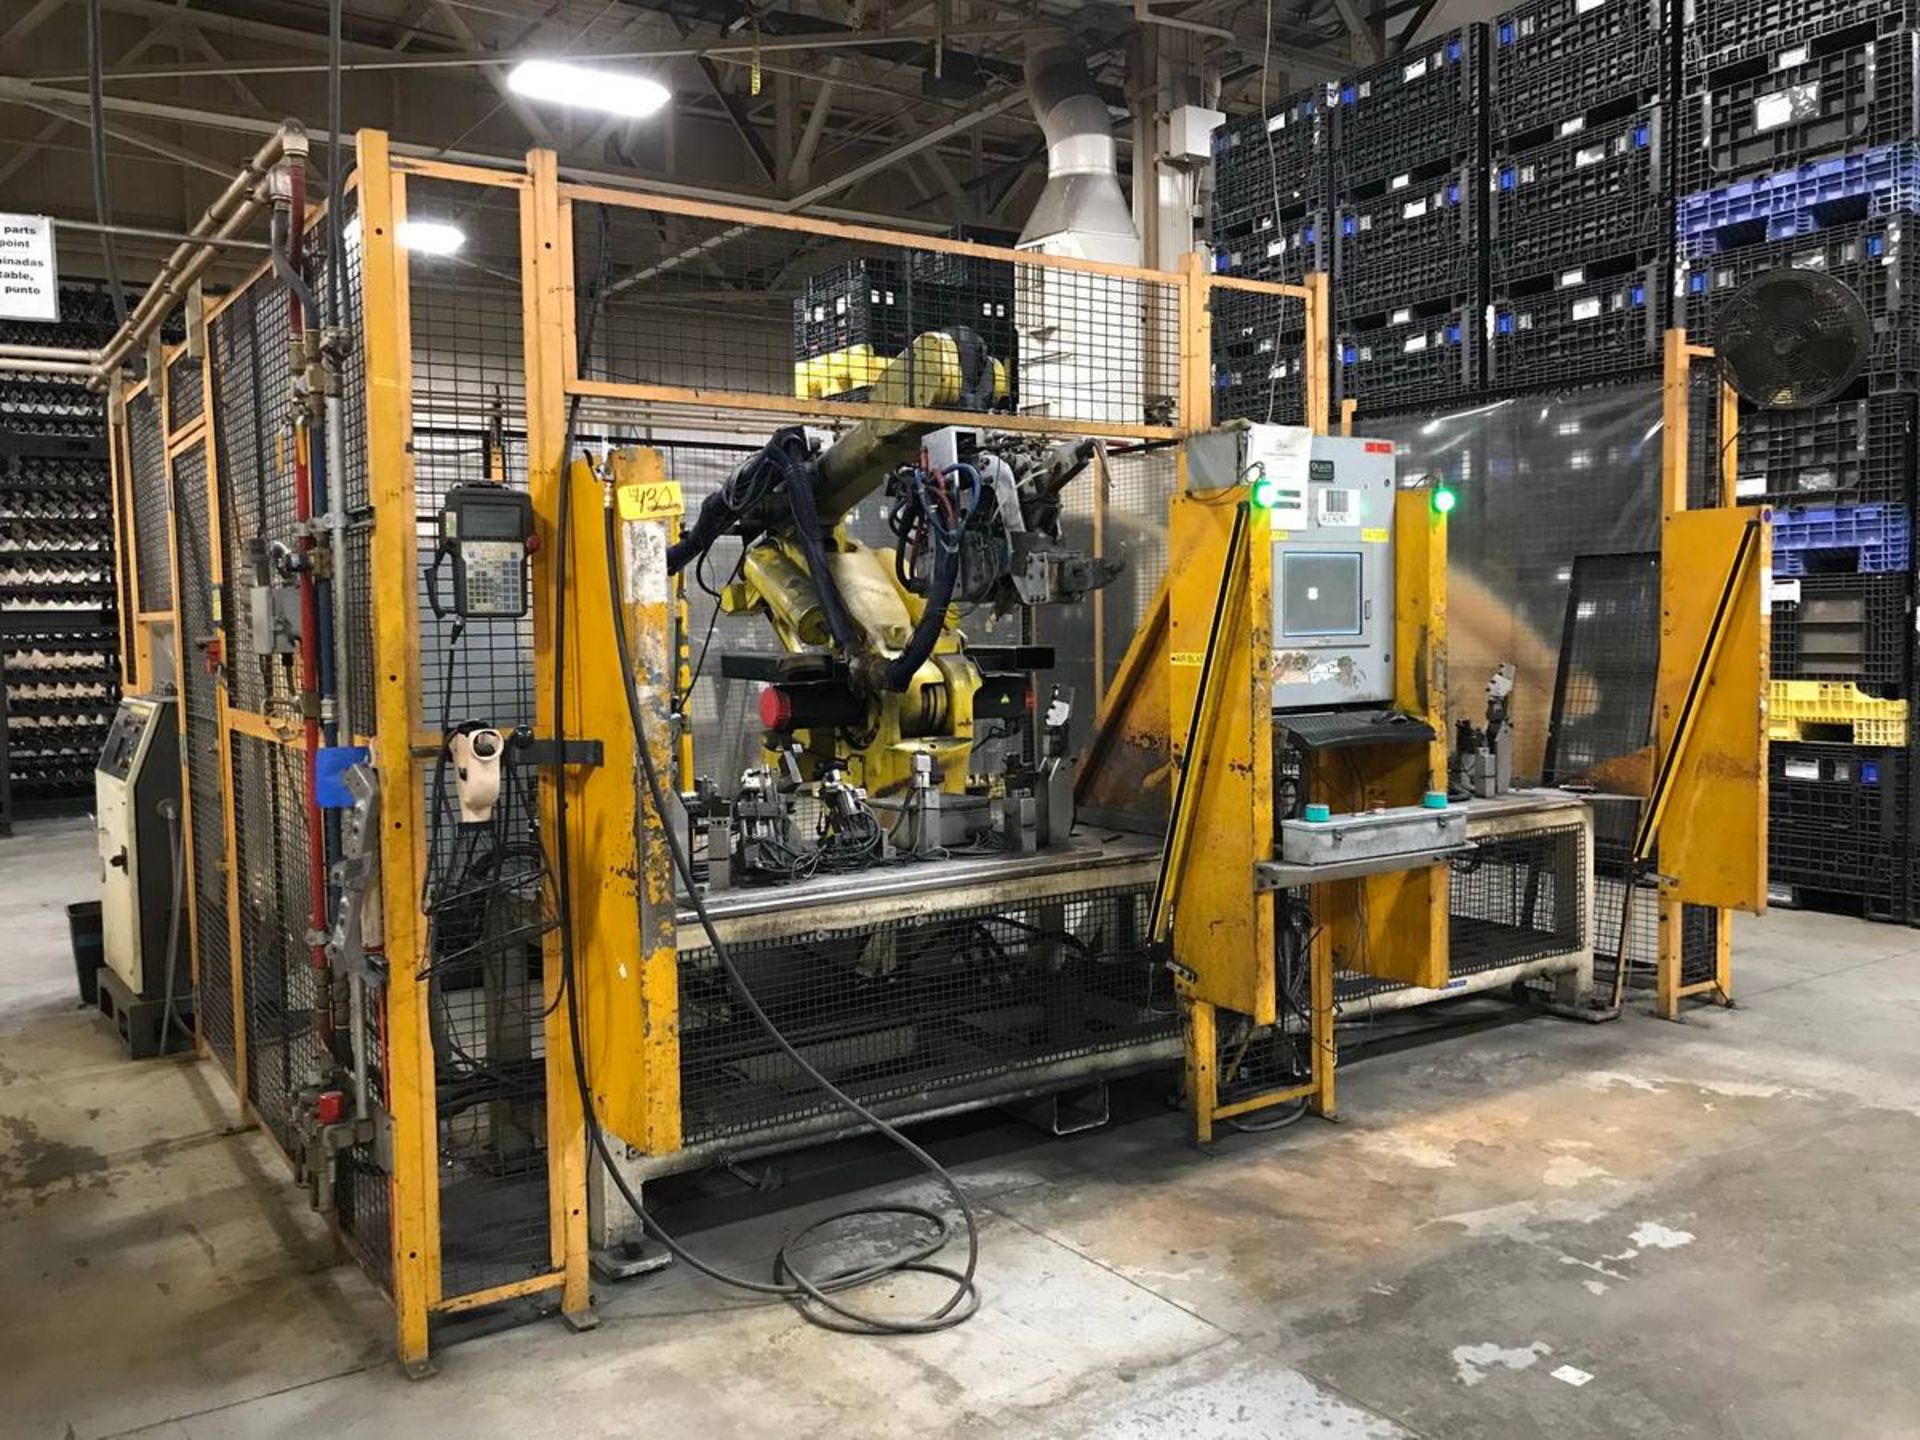 Fanuc S-420iw 6-Axis Robotic Arm Cell